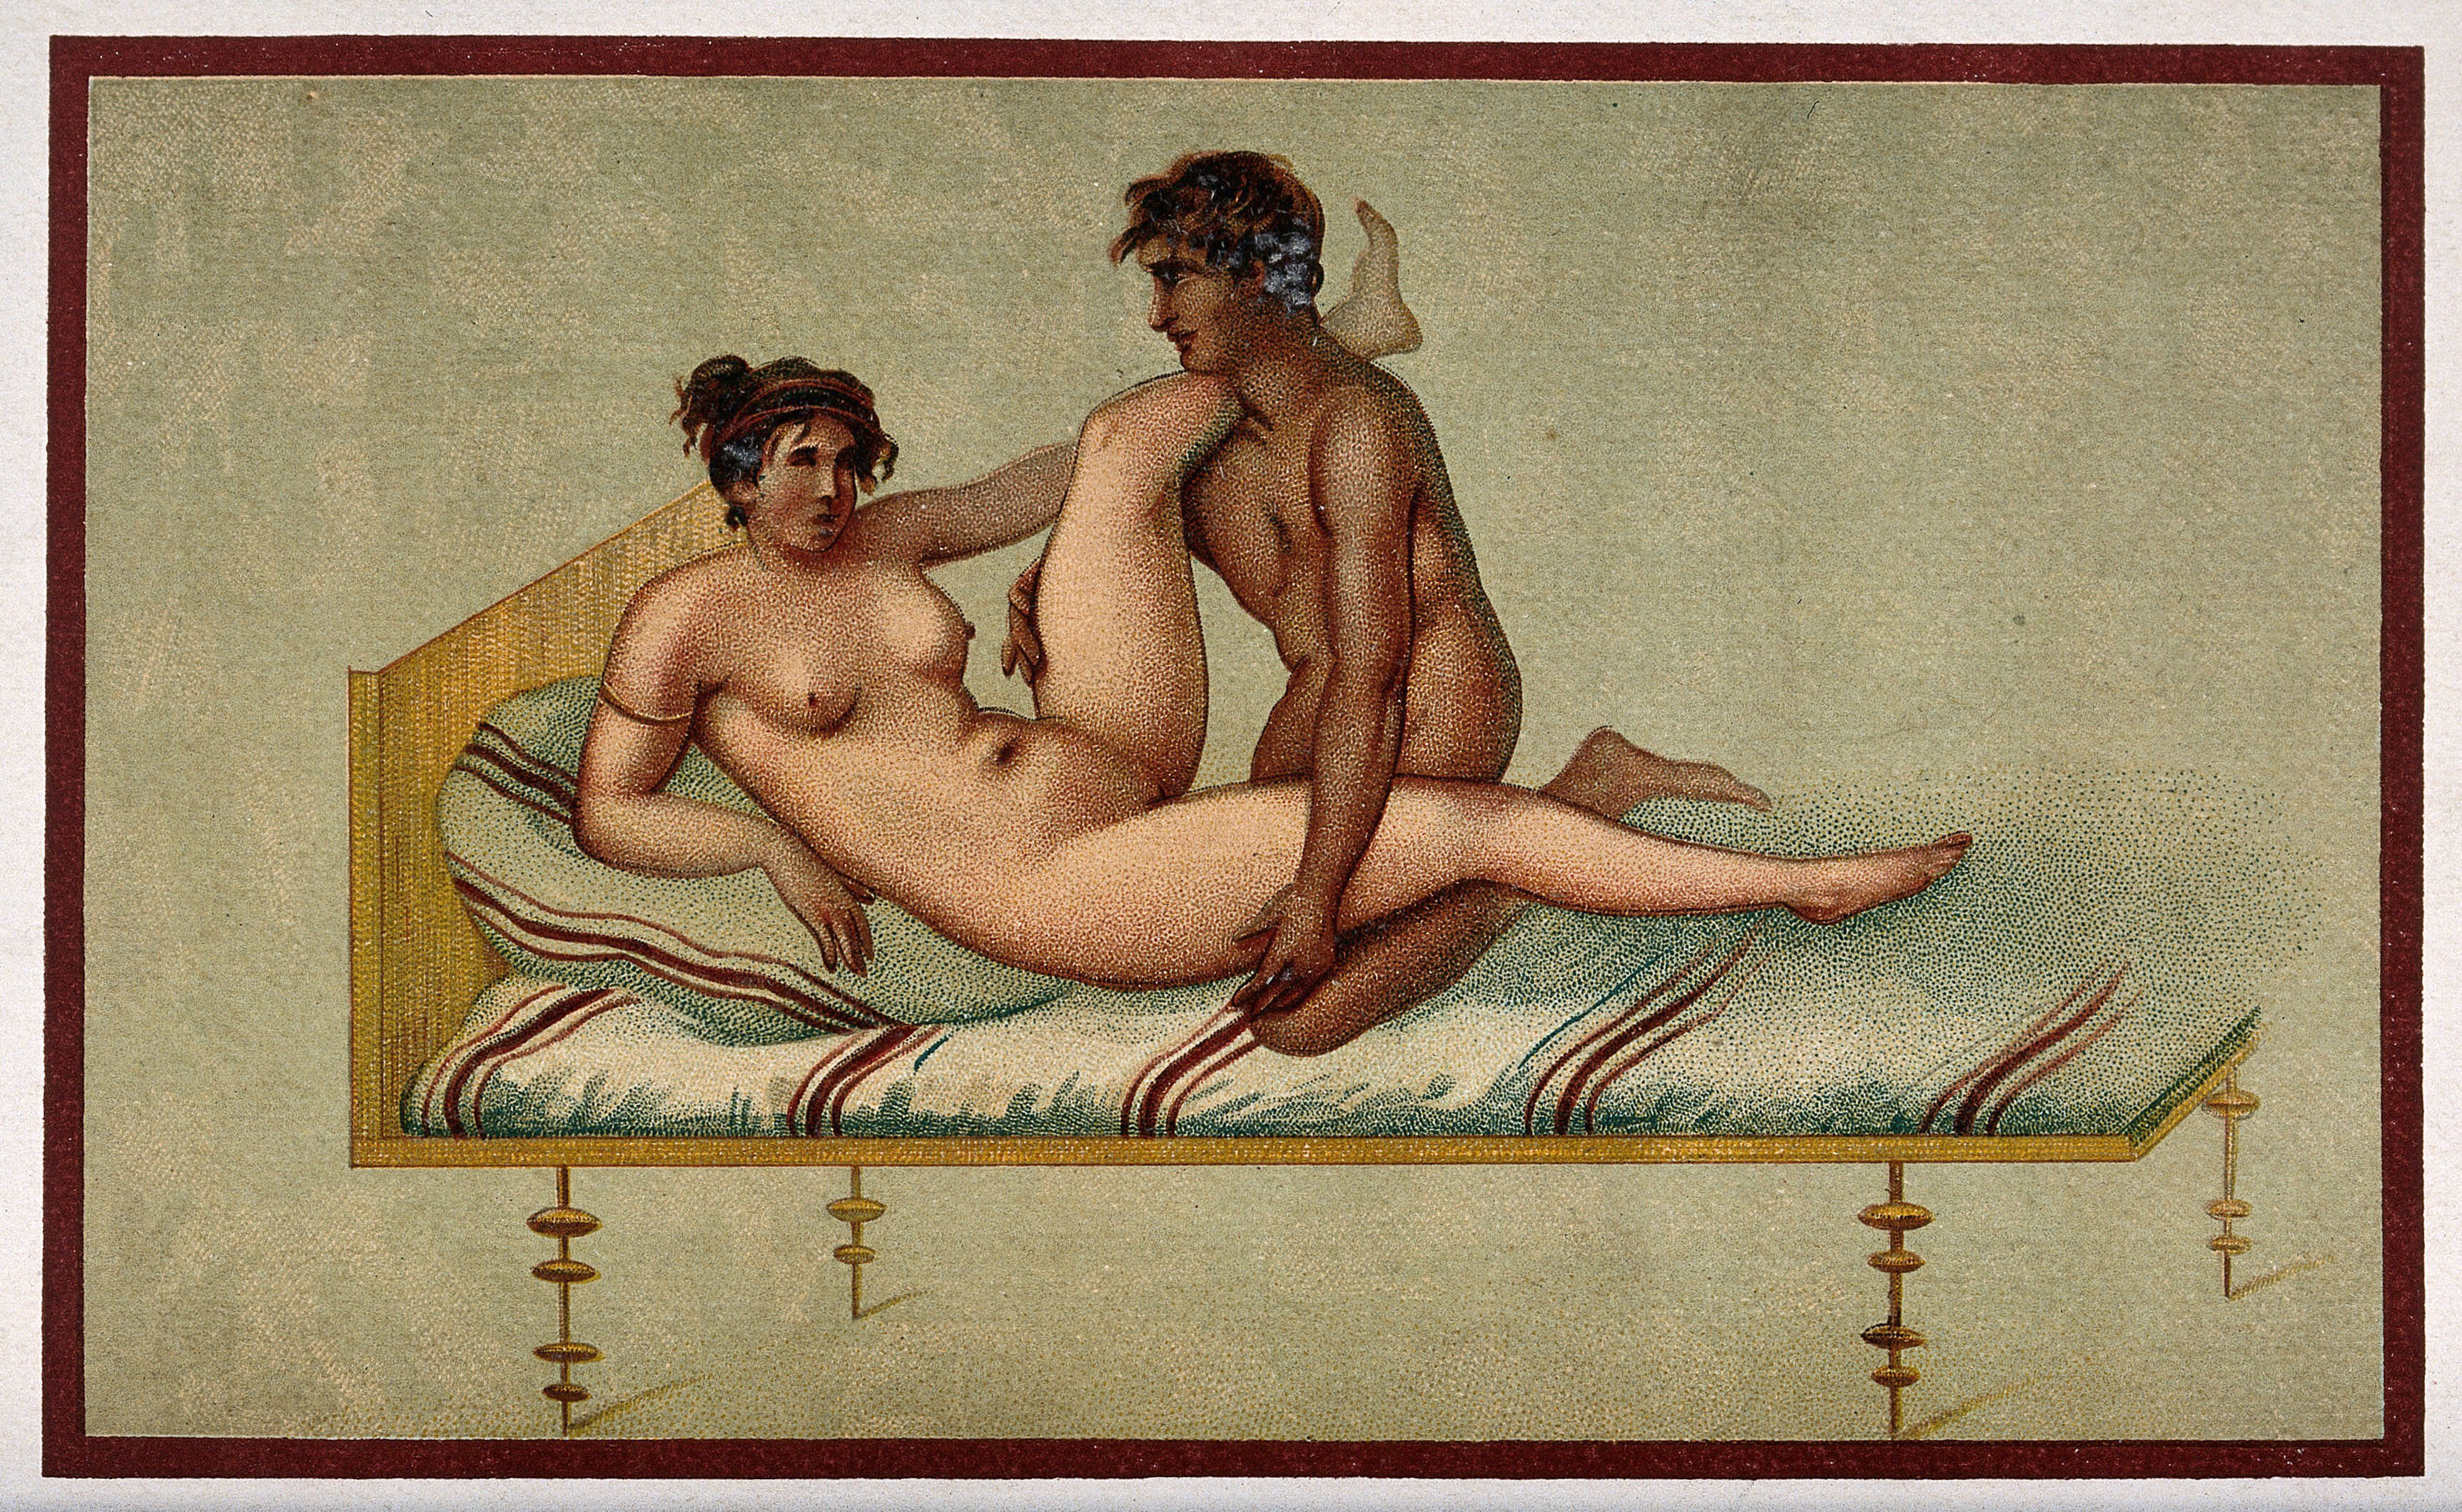 A naked man and woman in sexual congress on a